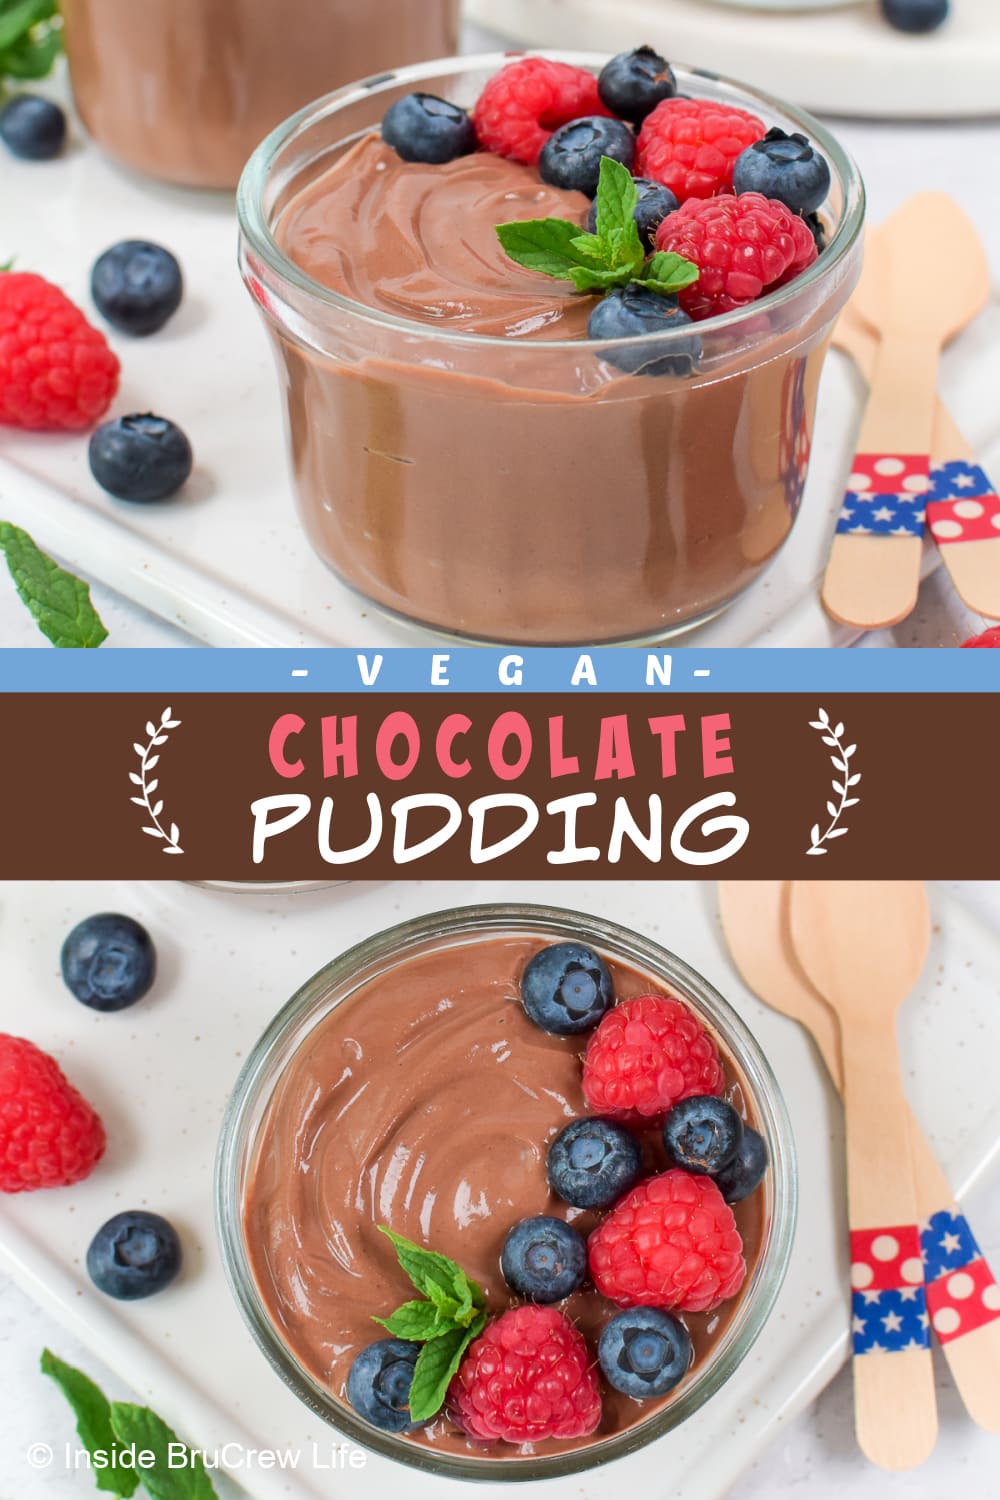 Two pictures of protein pudding collaged together with a brown text box.